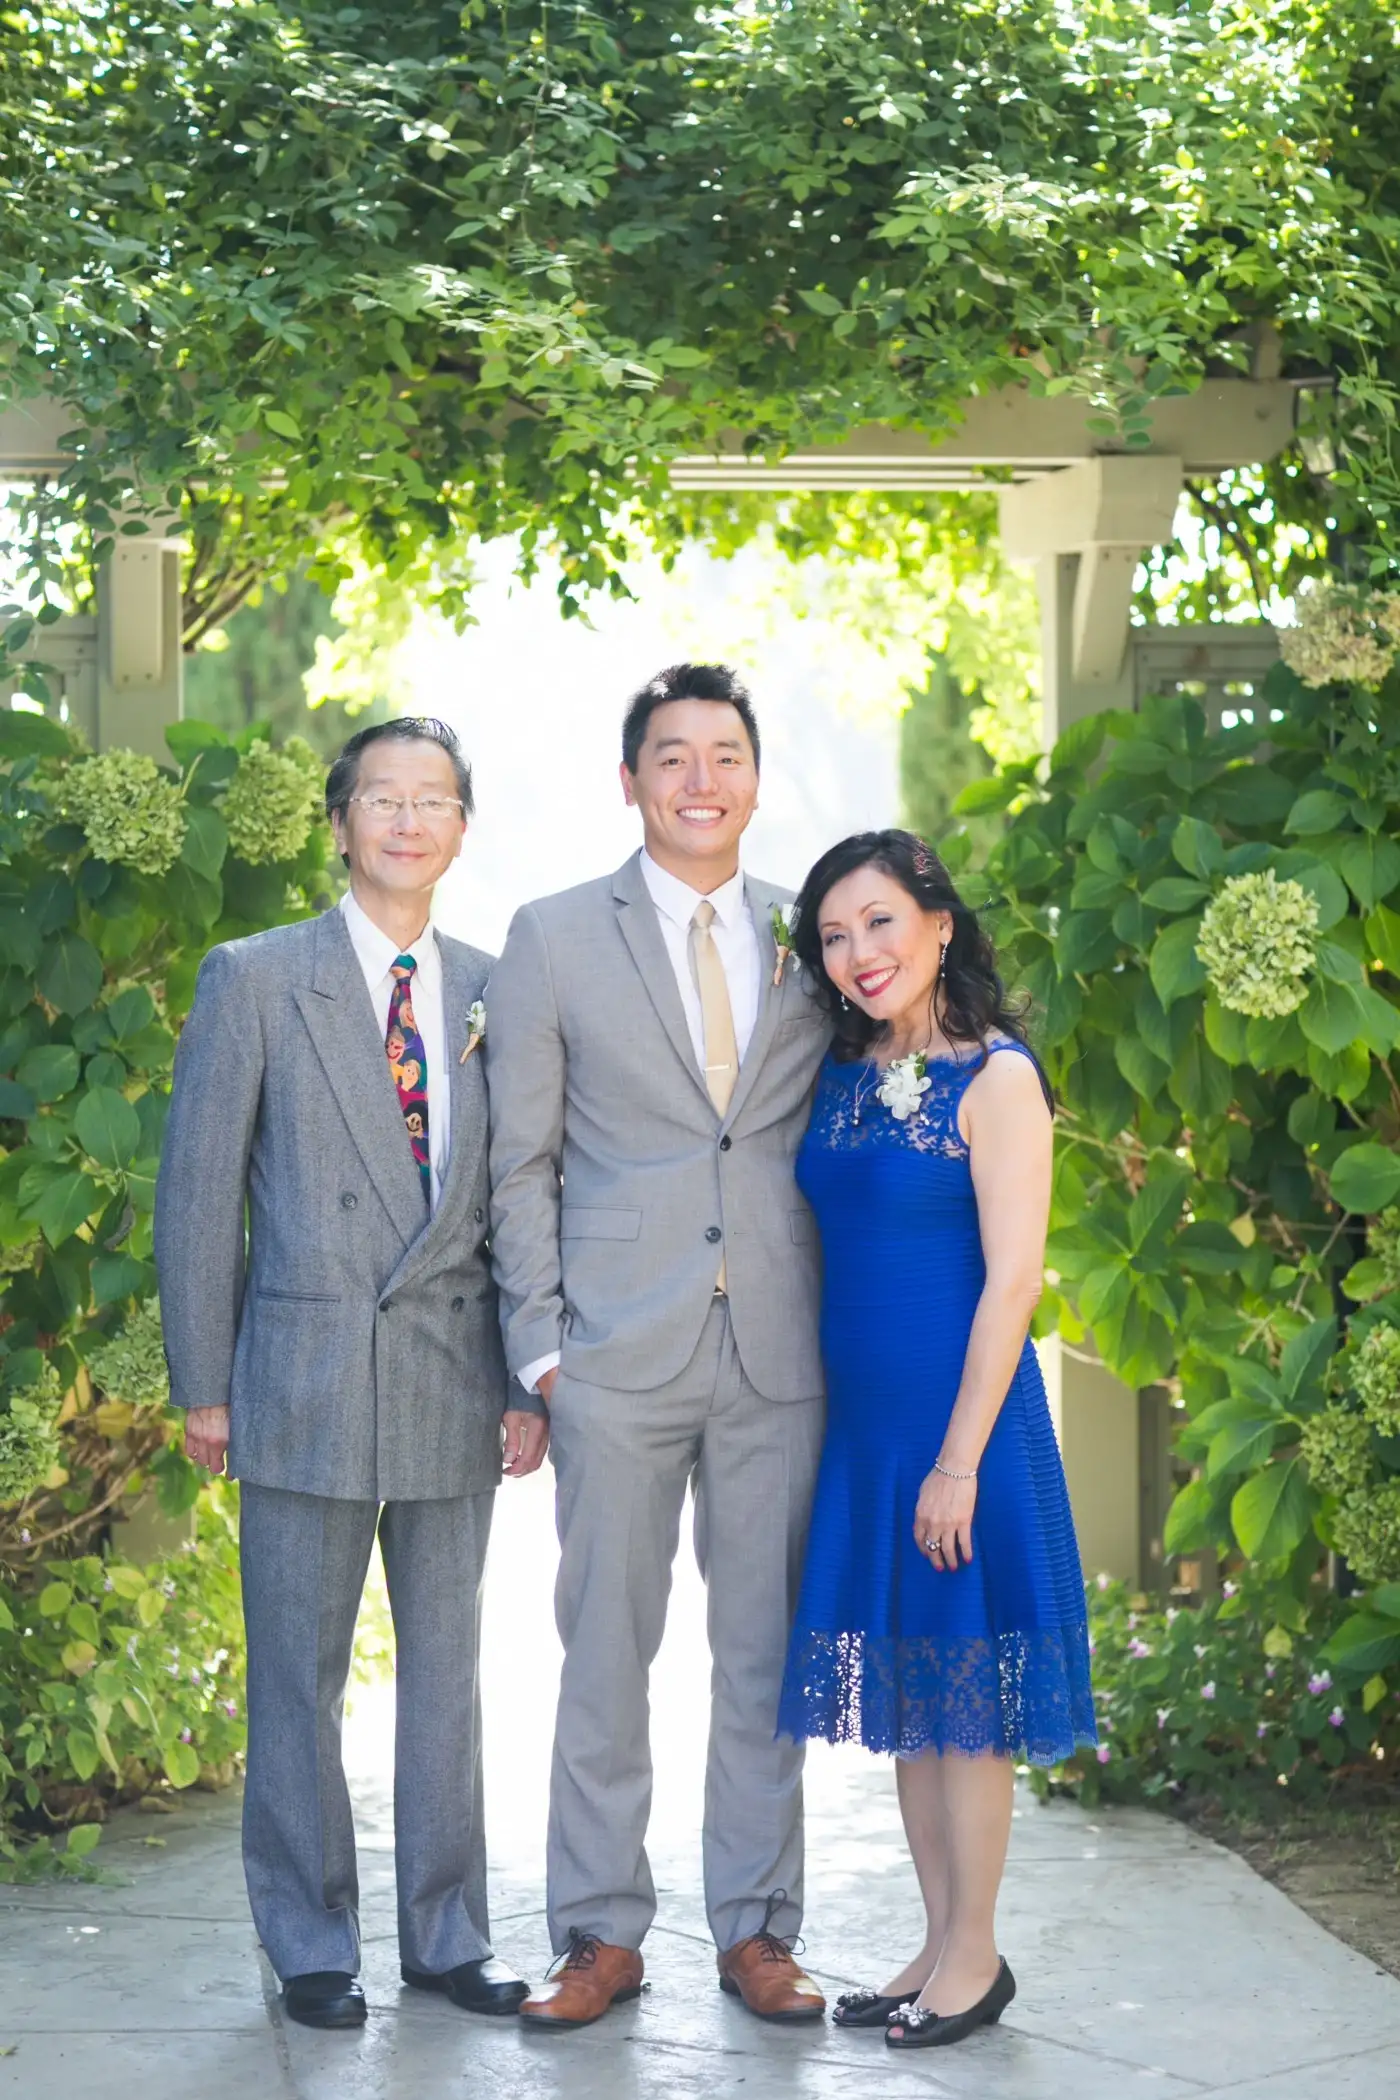 Austin Wang, co-founder of Groove, stands with his parents.